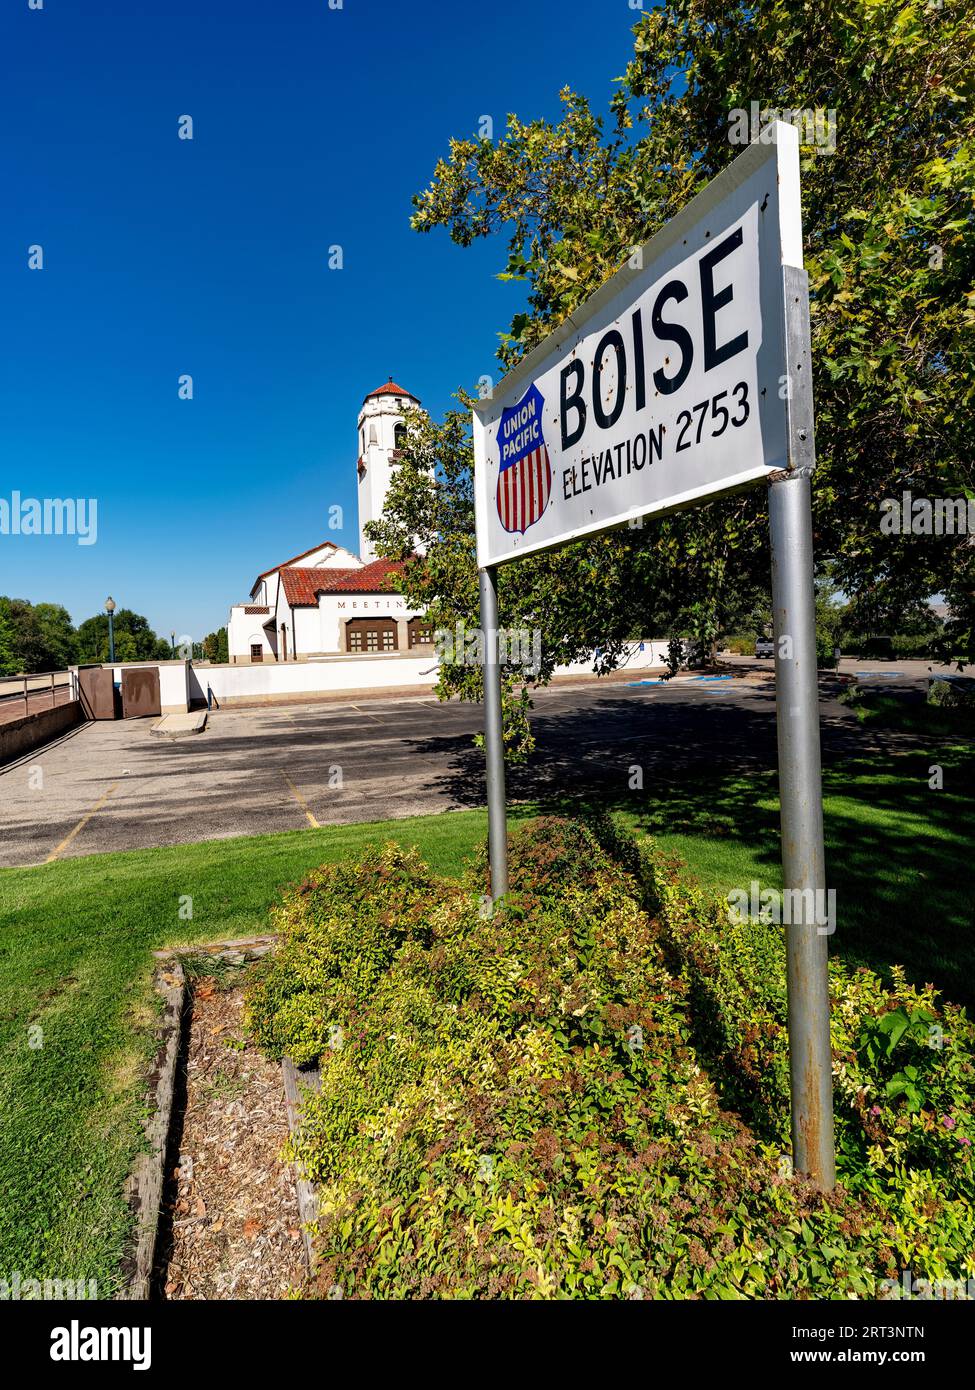 Iconic train depot in Boise Idaho with Union Pacific sign Stock Photo